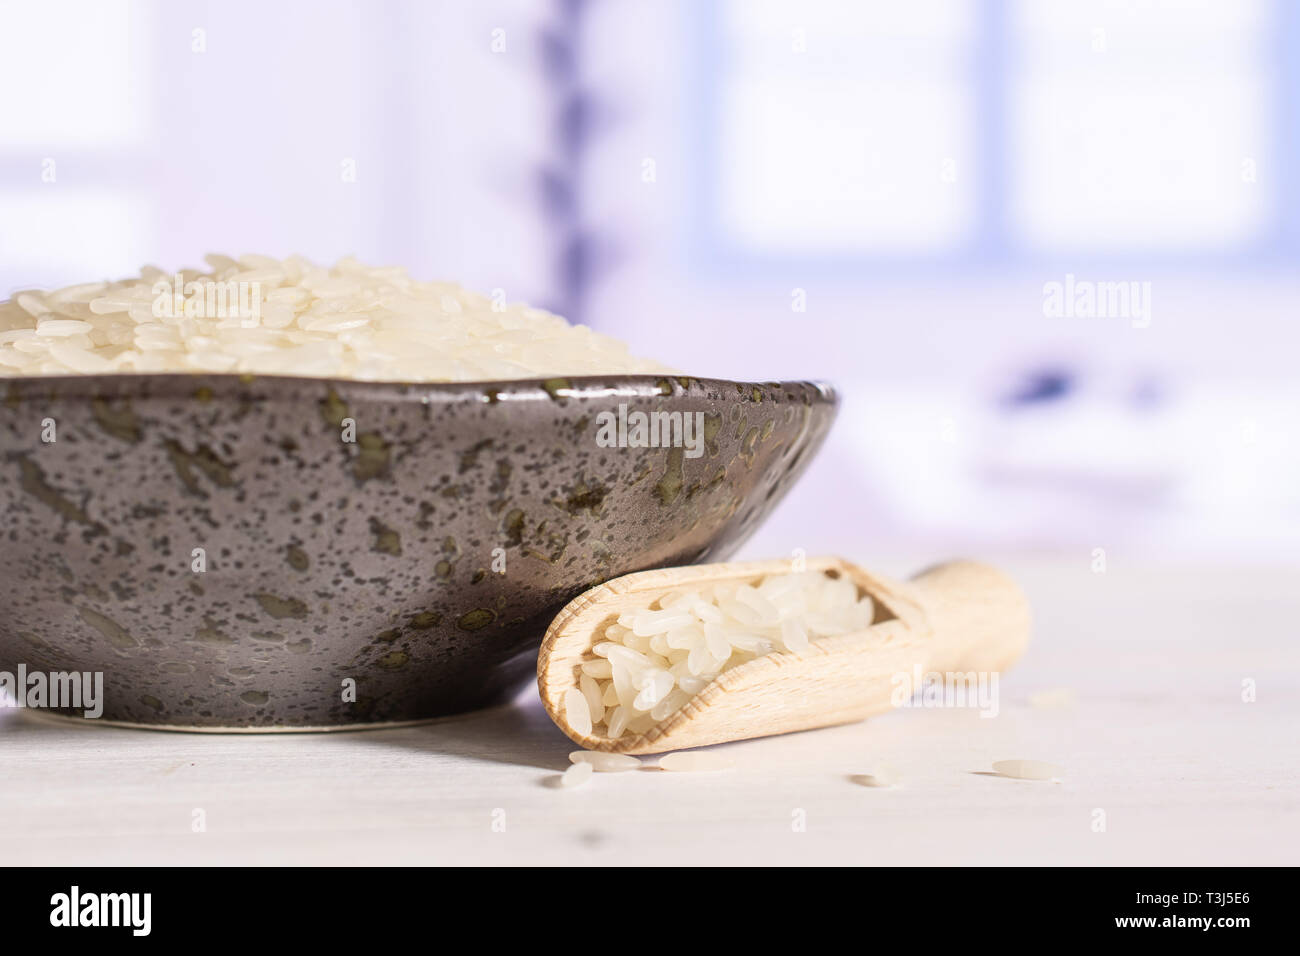 Lot of whole white jasmine rice grains on grey ceramic plate with wooden scoop with blue window in a white kitchen Stock Photo